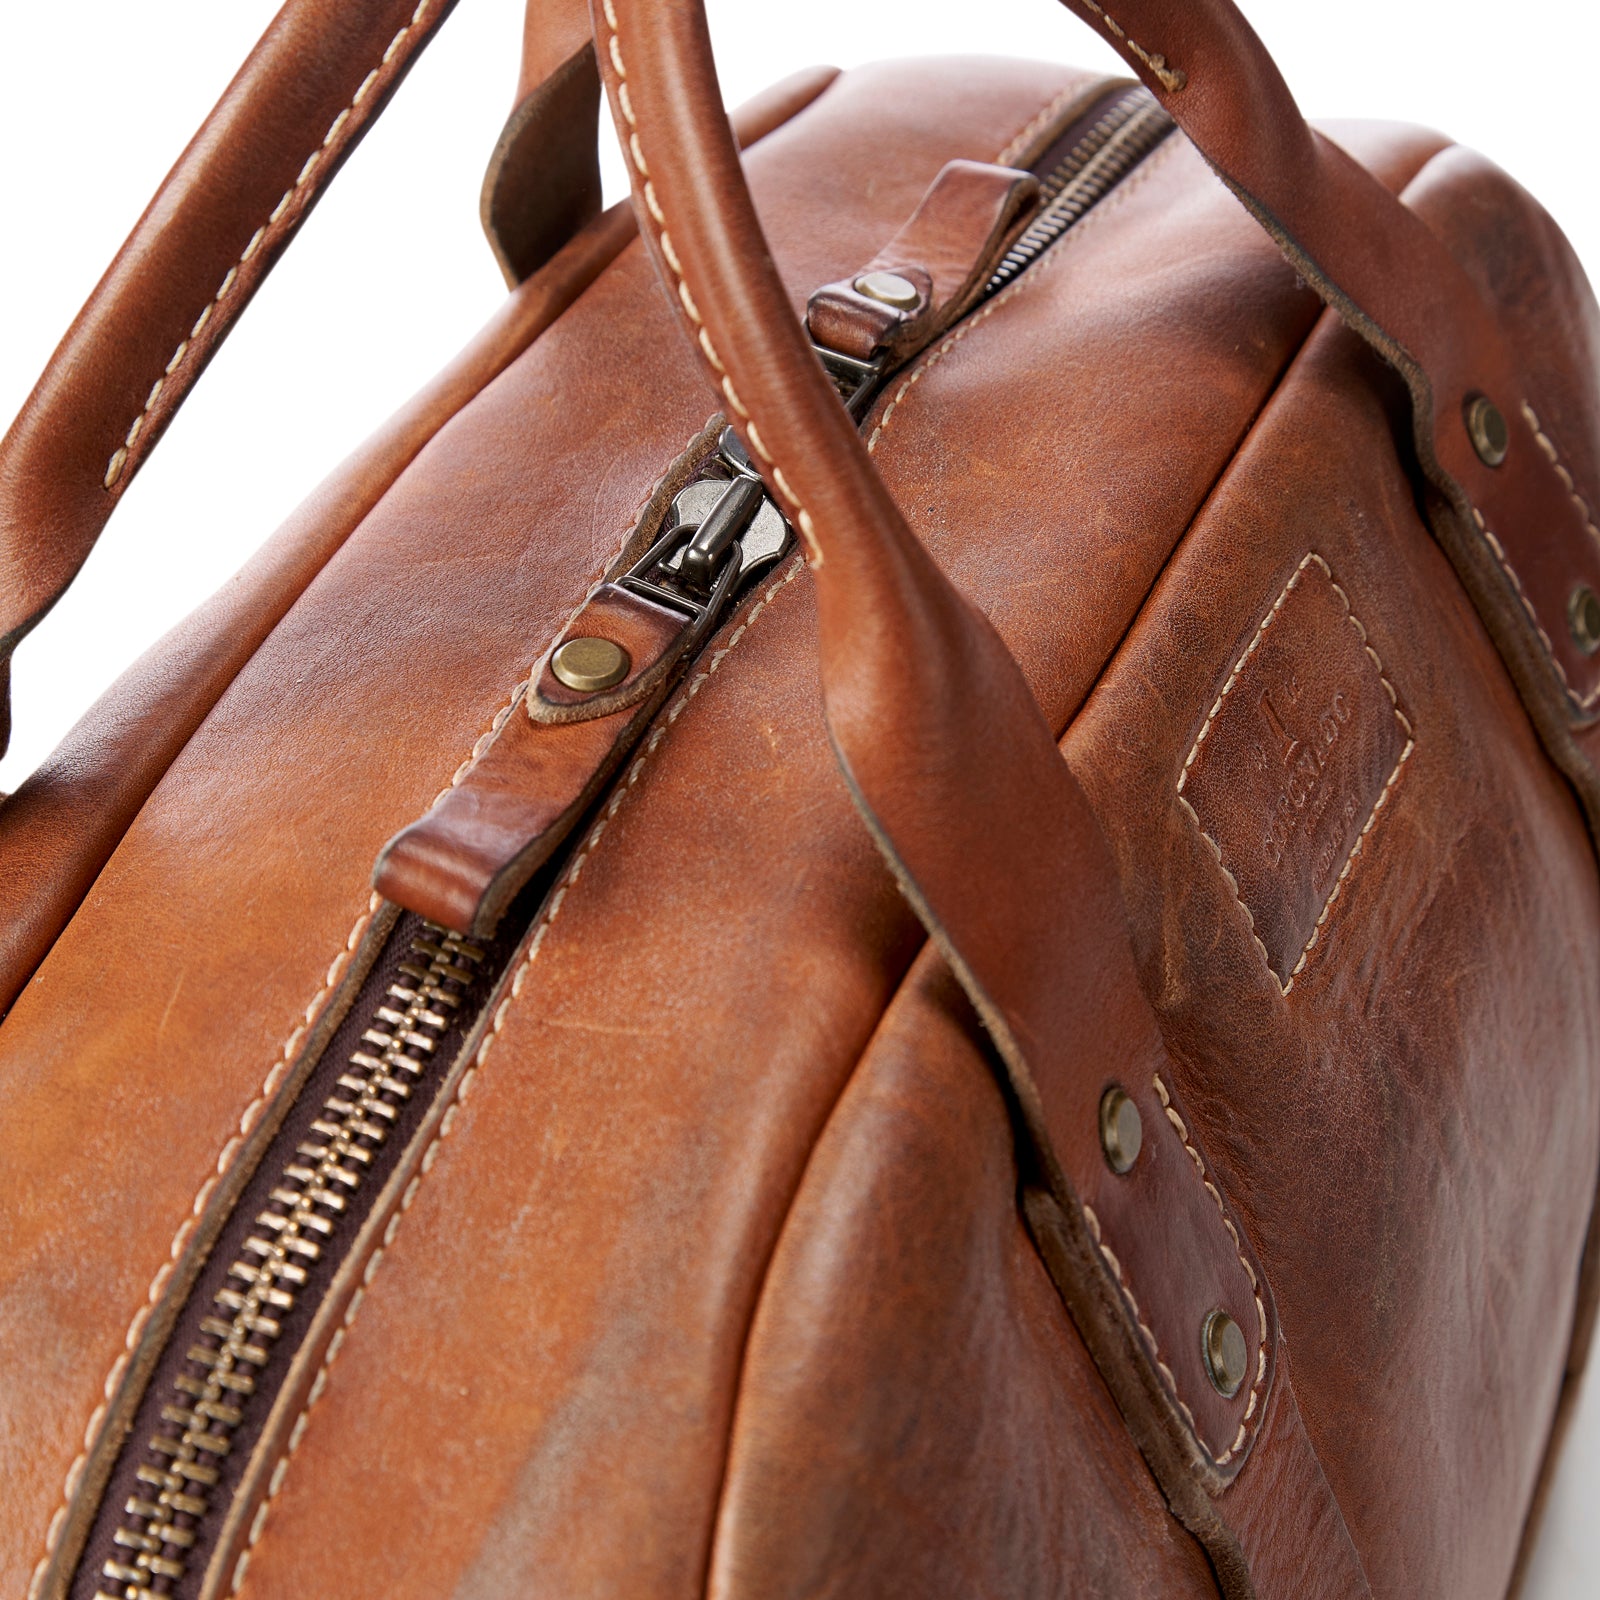 Vintage Stone-Washed Duffel #120